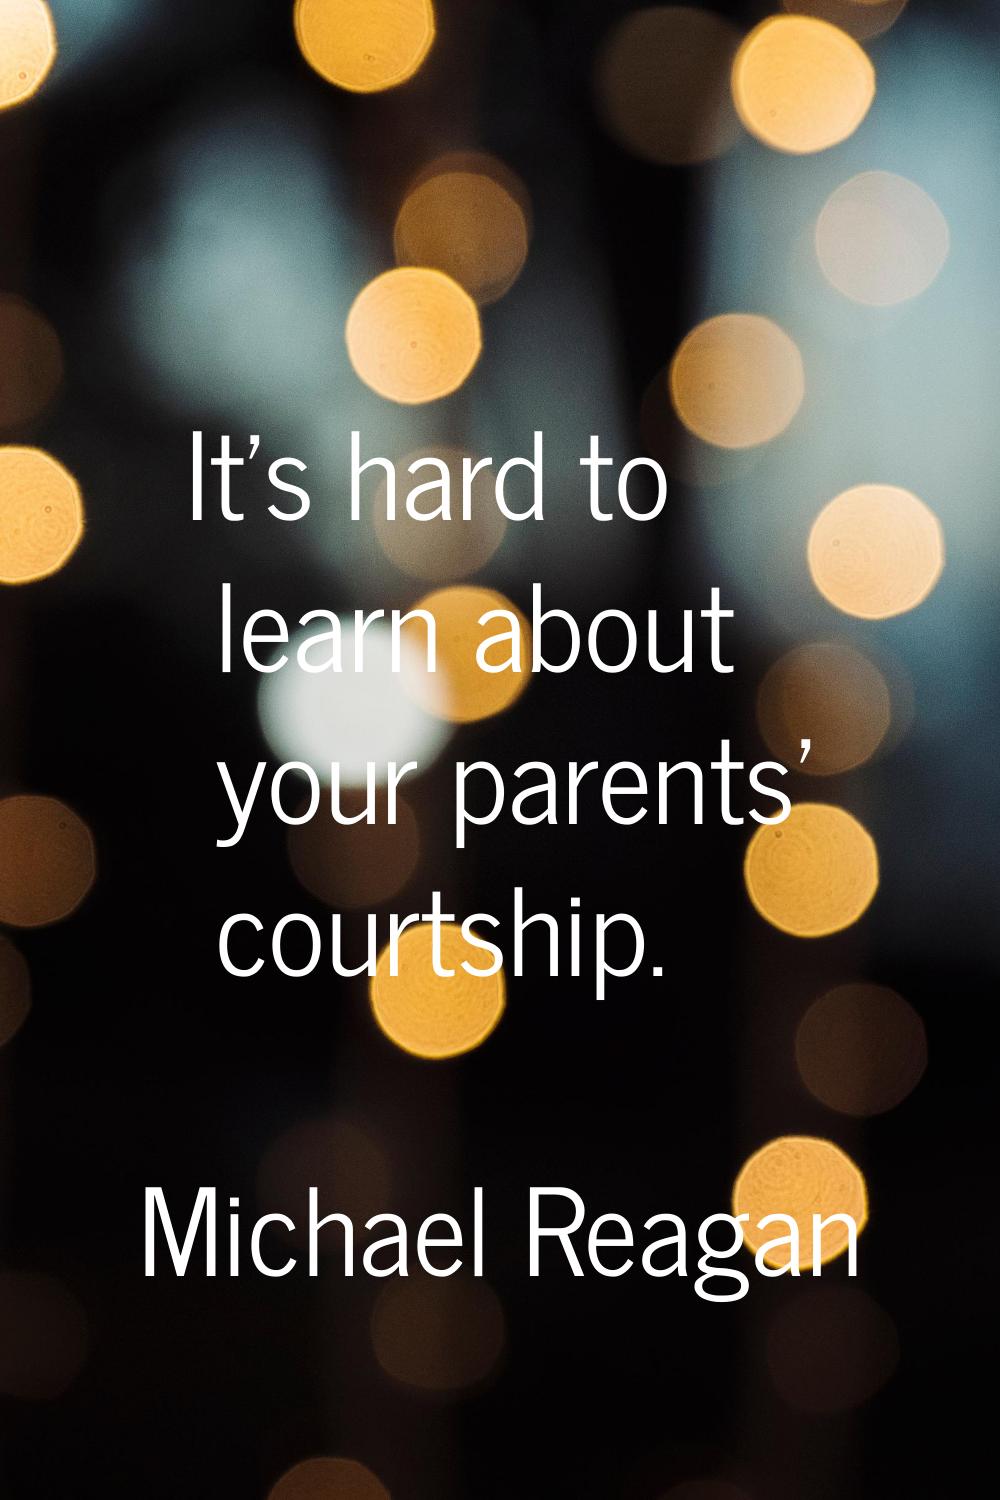 It's hard to learn about your parents' courtship.